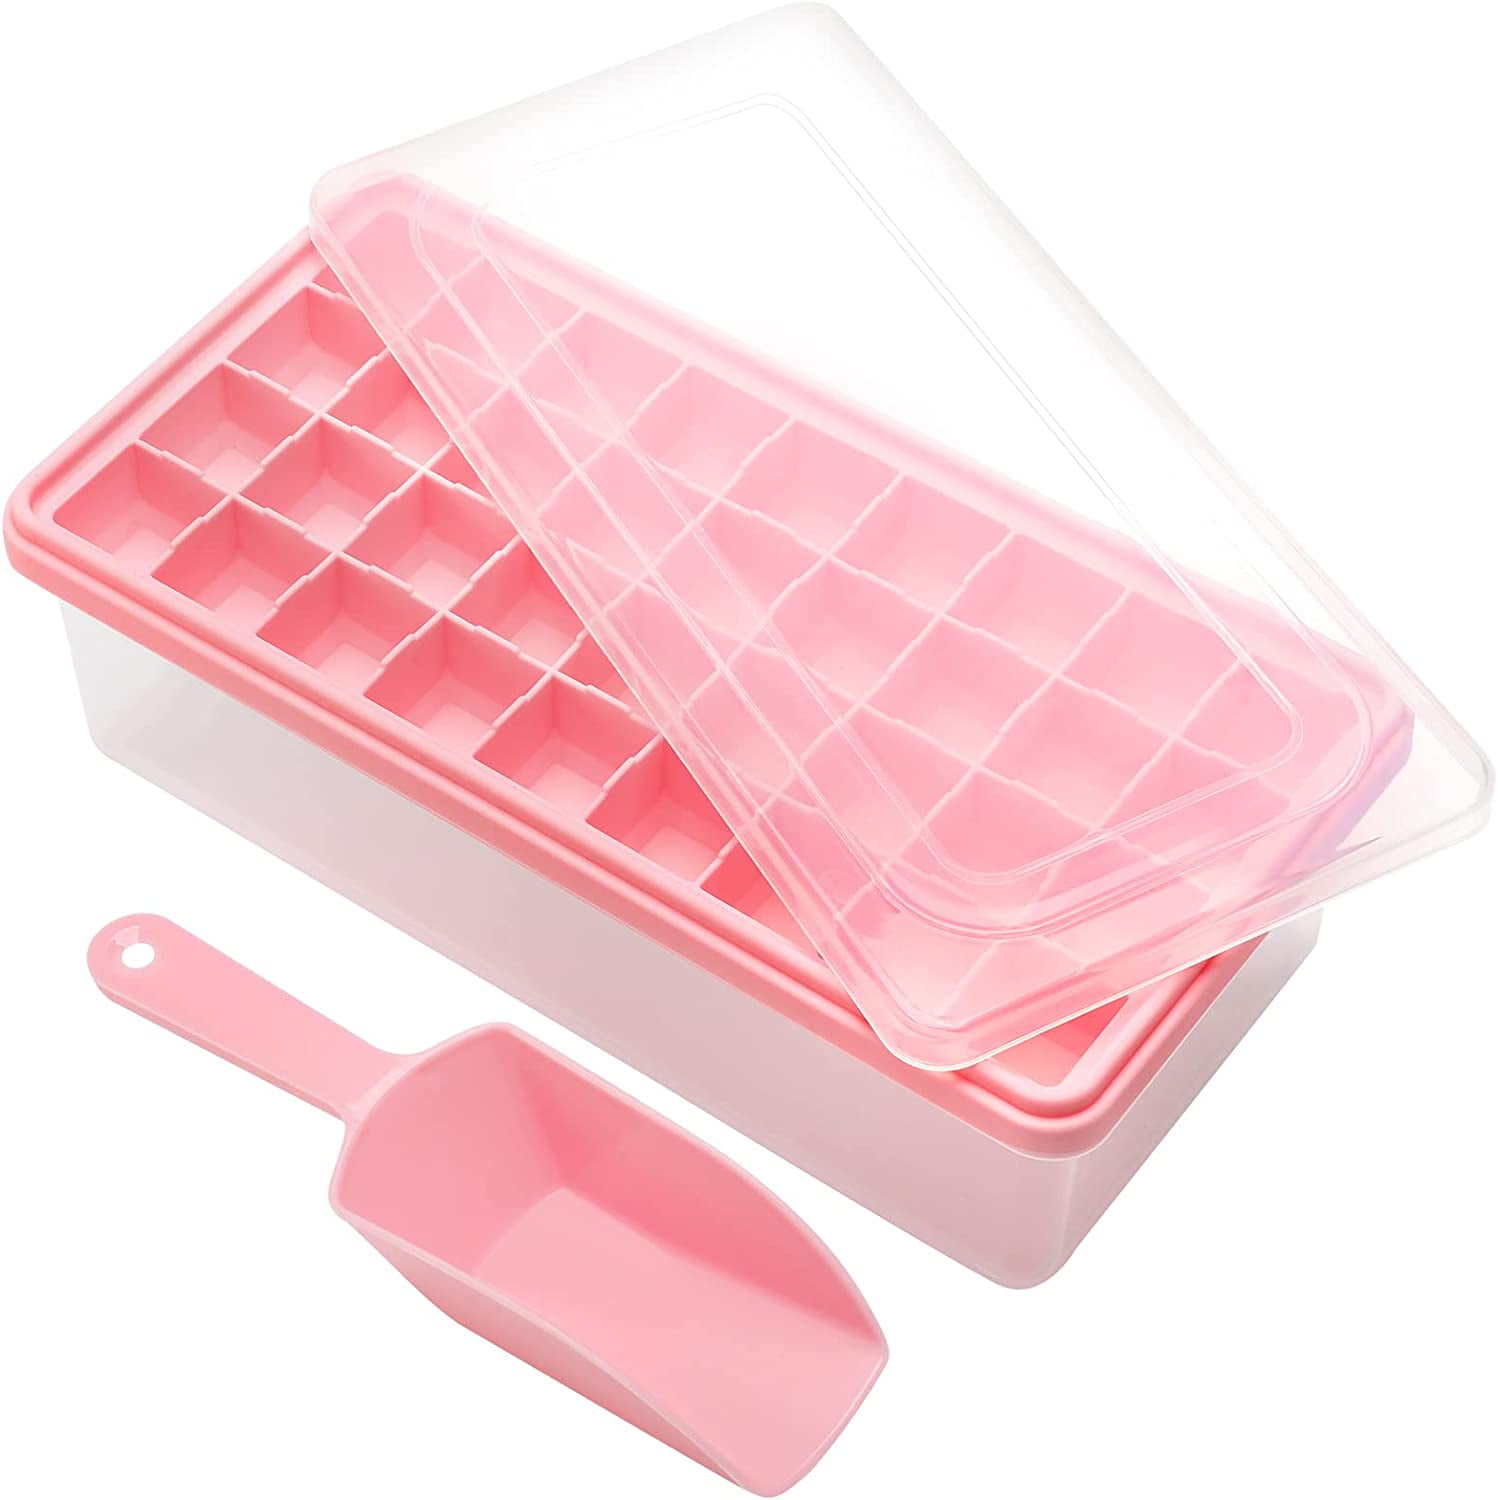 Cozy Kitchen Essentials CKE Mini Ice Cube Tray with Bin, 104 Pcs Tiny Pebble Ice Tray for Freezer with Ice Bin, Ice Scoop and Stainless Steel Straw, Crushed Easy Release